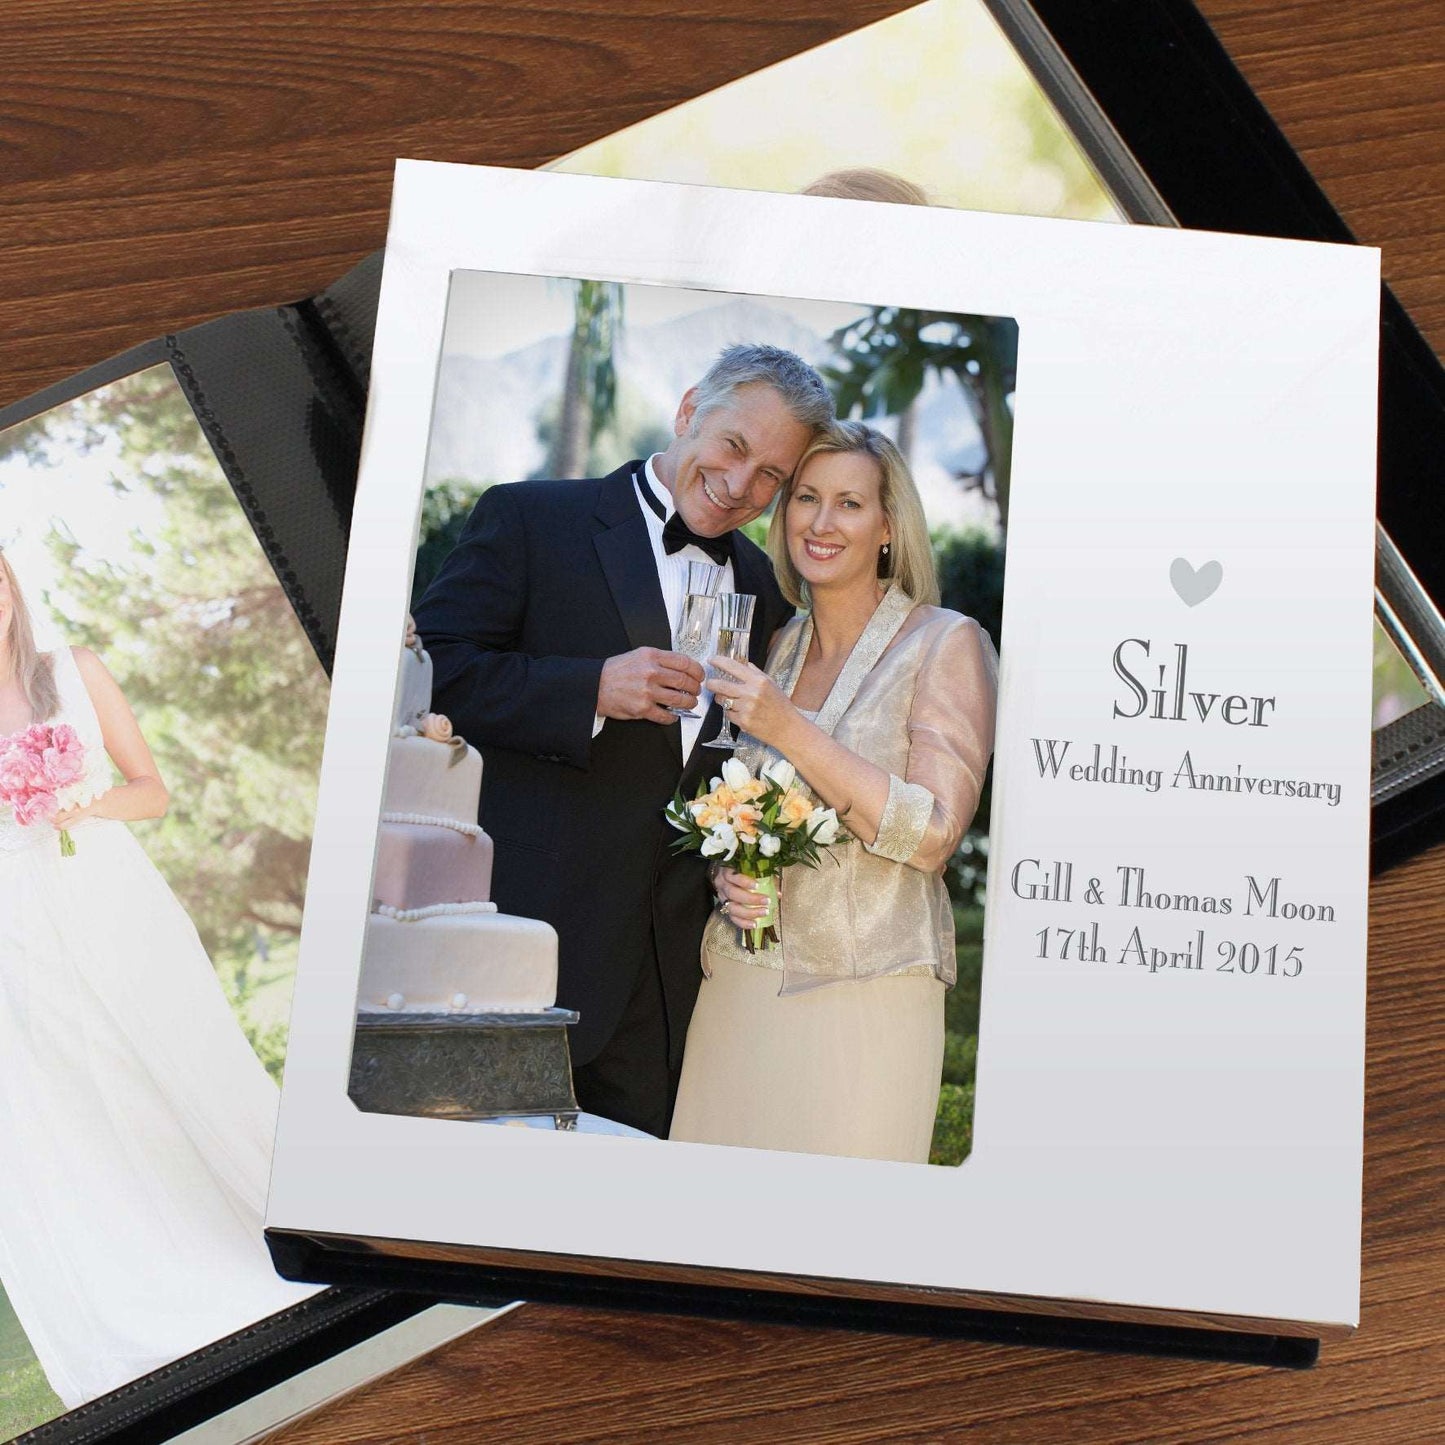 Decorative Silver Wedding Anniversary Personalised Photo Frame Album-Personalised Gift By Sweetlea Gifts